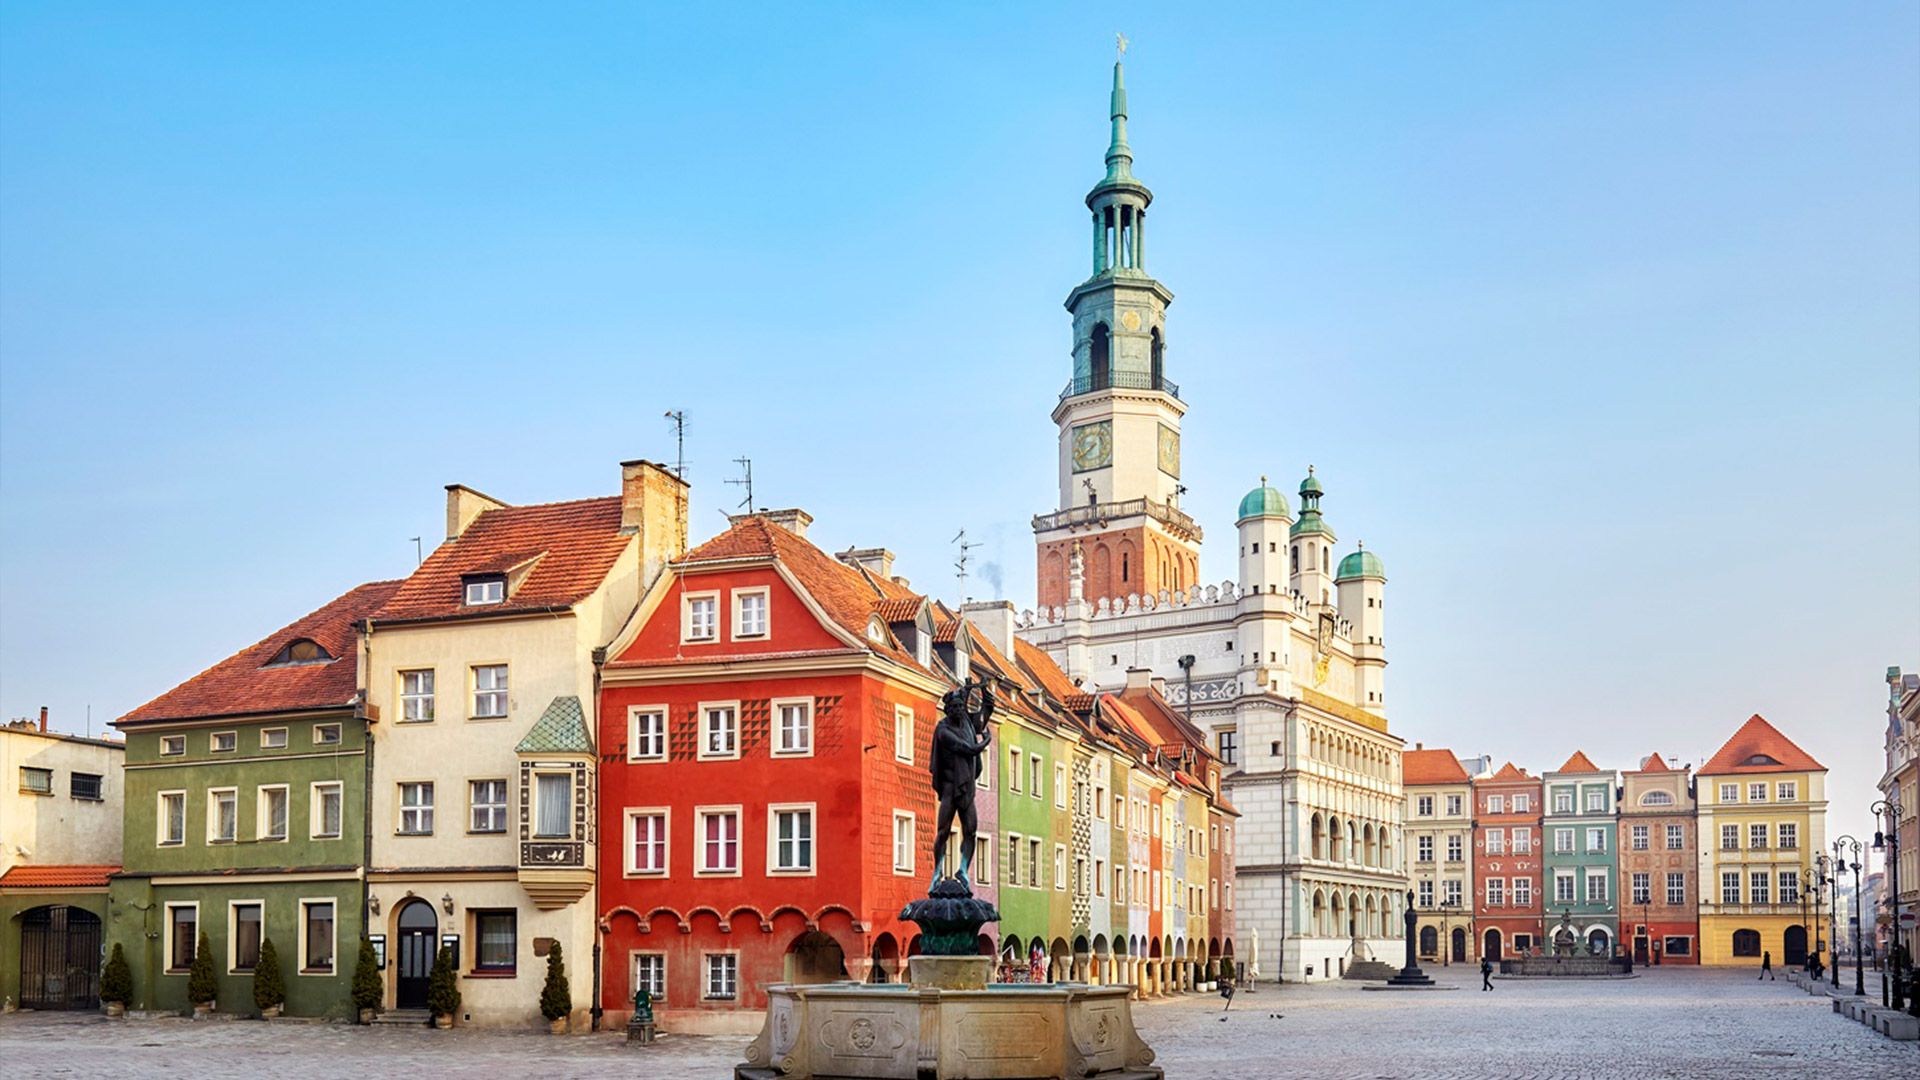 With PayPorter, you can make fast, easy and safe money transfers to Poland at the most affordable prices!